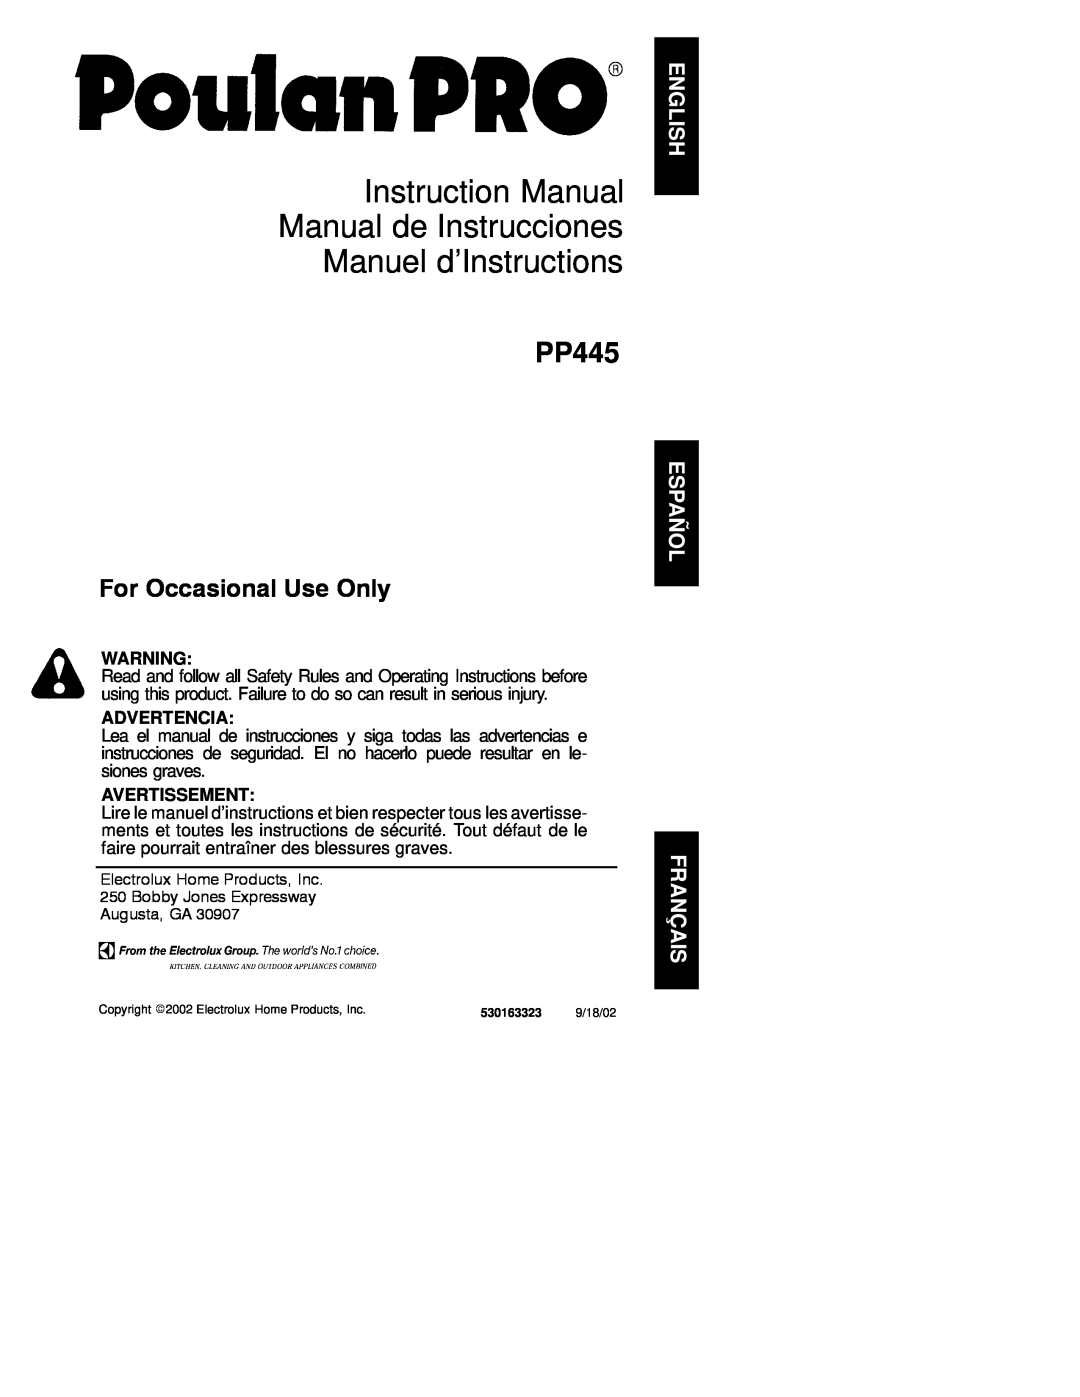 Poulan 530163323 instruction manual Advertencia, Avertissement, PP445, For Occasional Use Only 